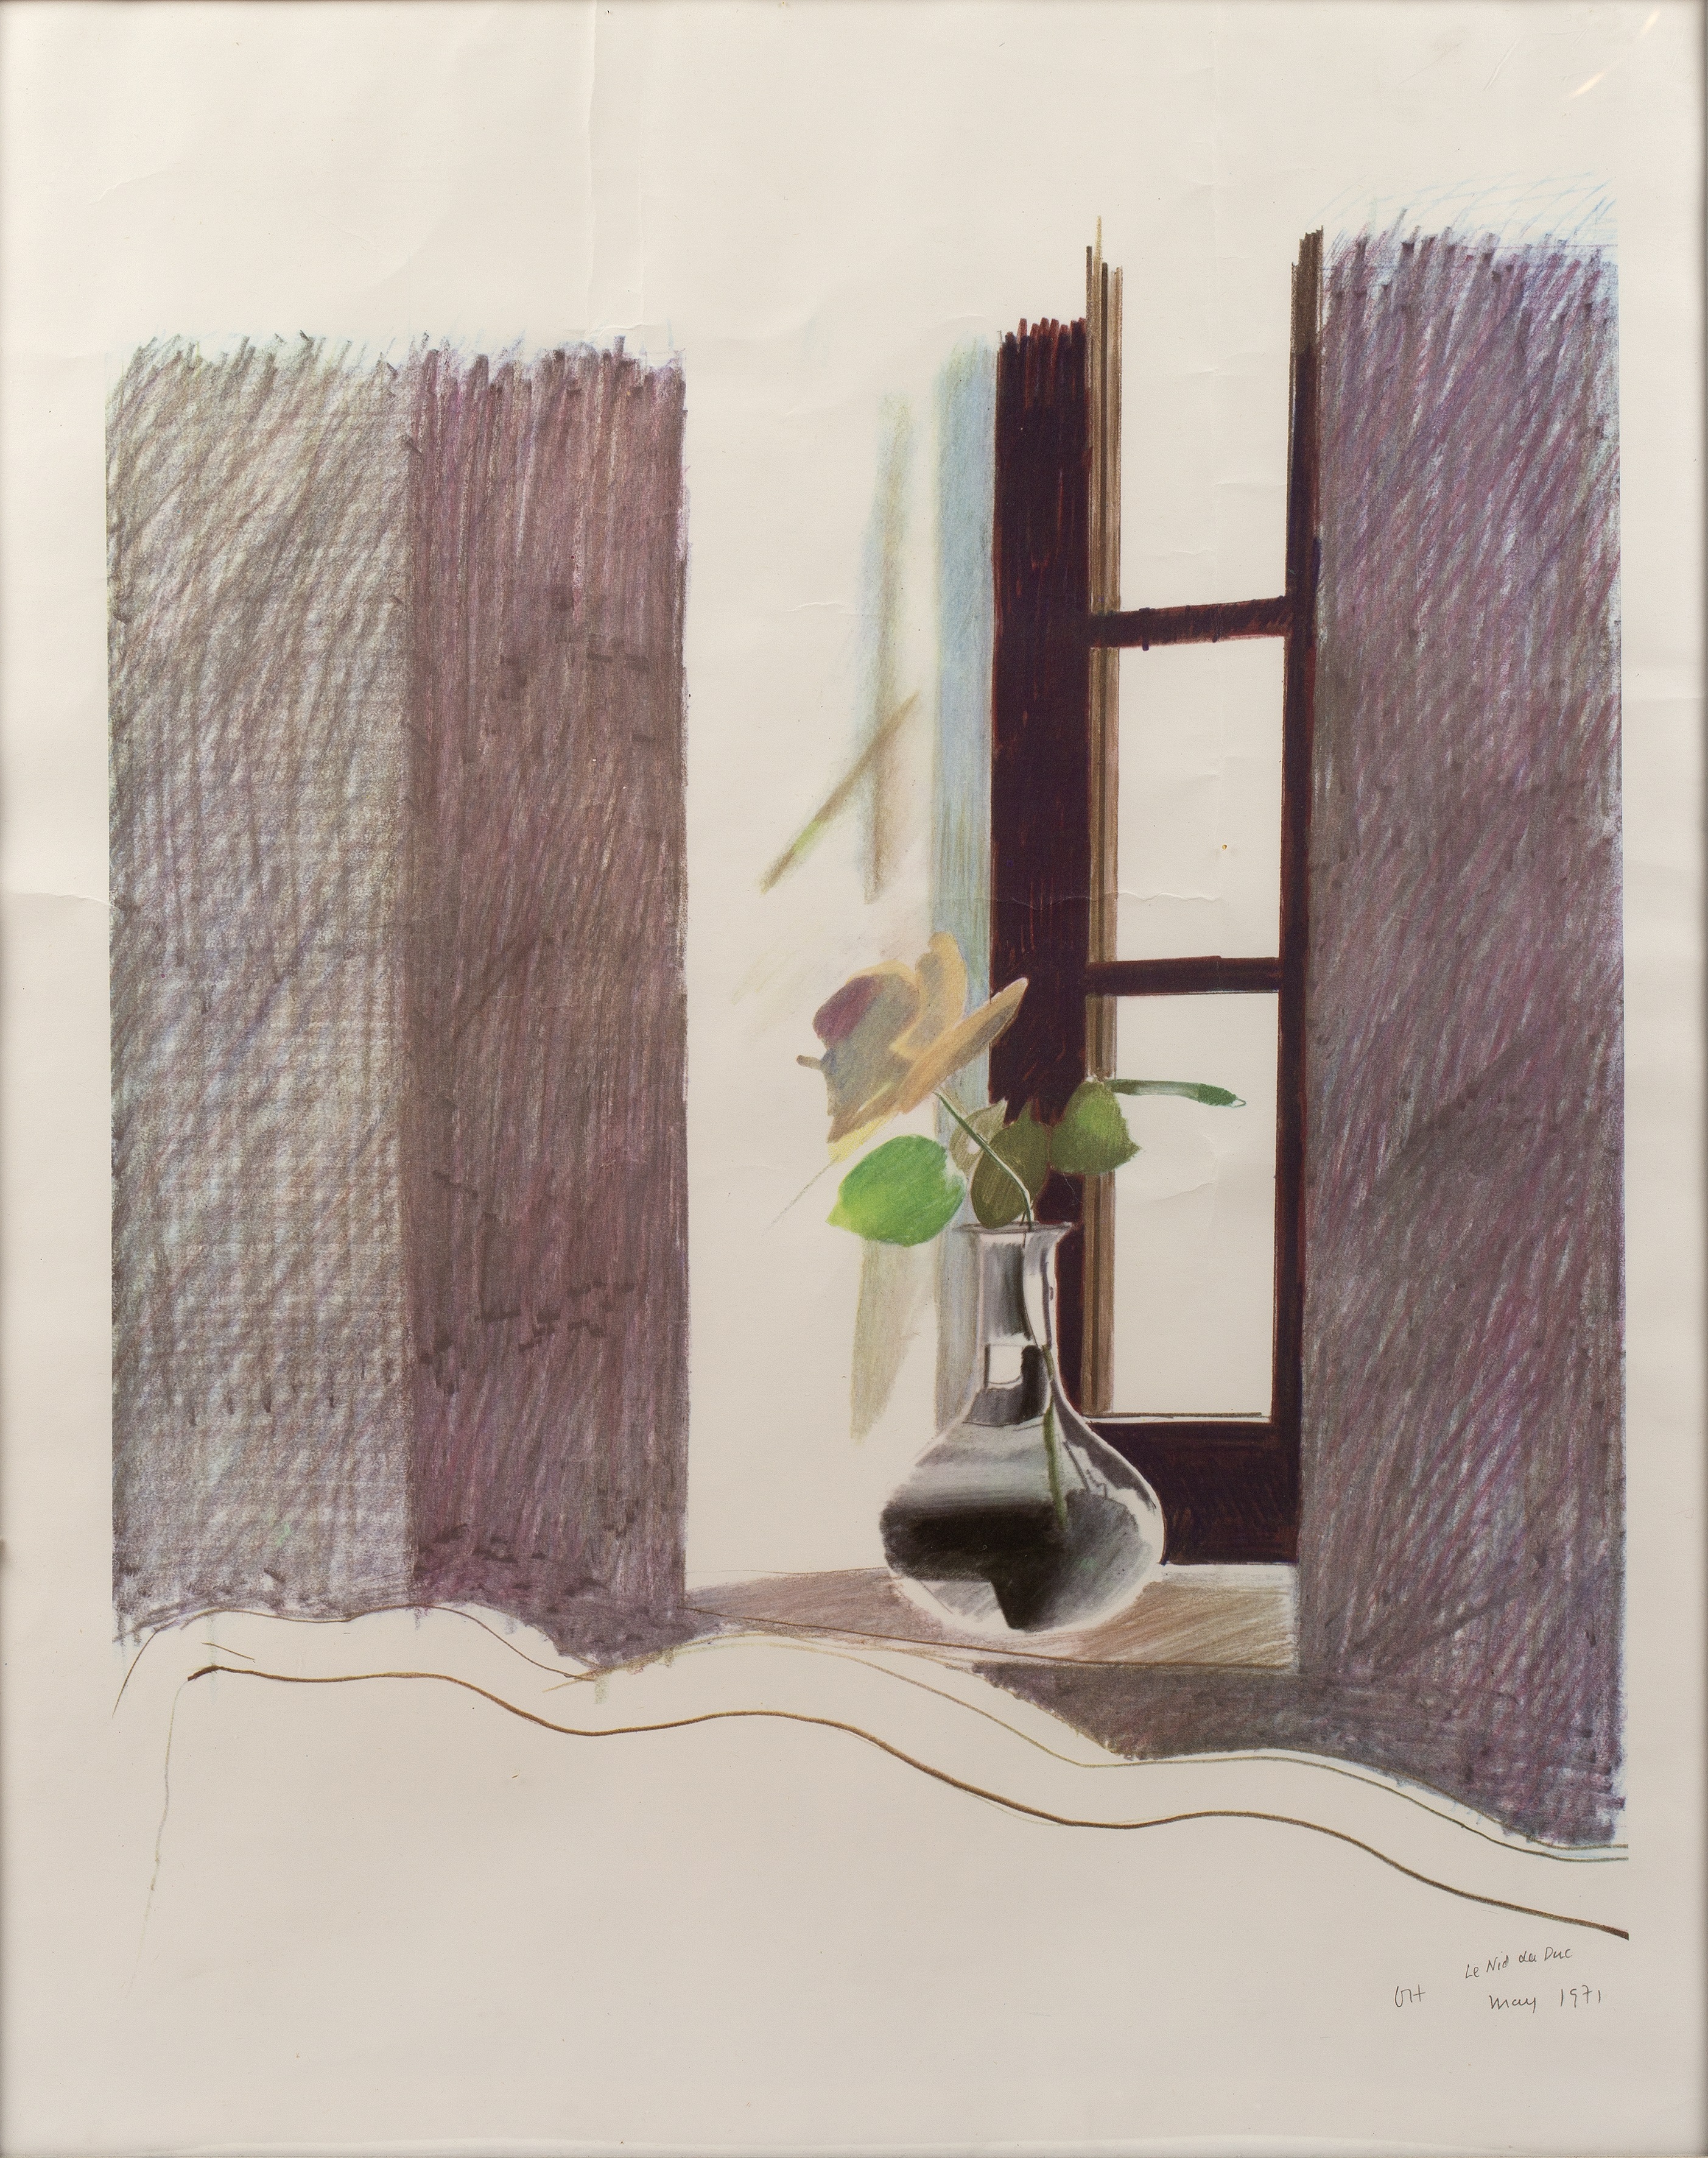 David Hockney (b.1937) 'Rose in a window', lithograph, 50cm x 39.5cm Overall scuffs, marks and